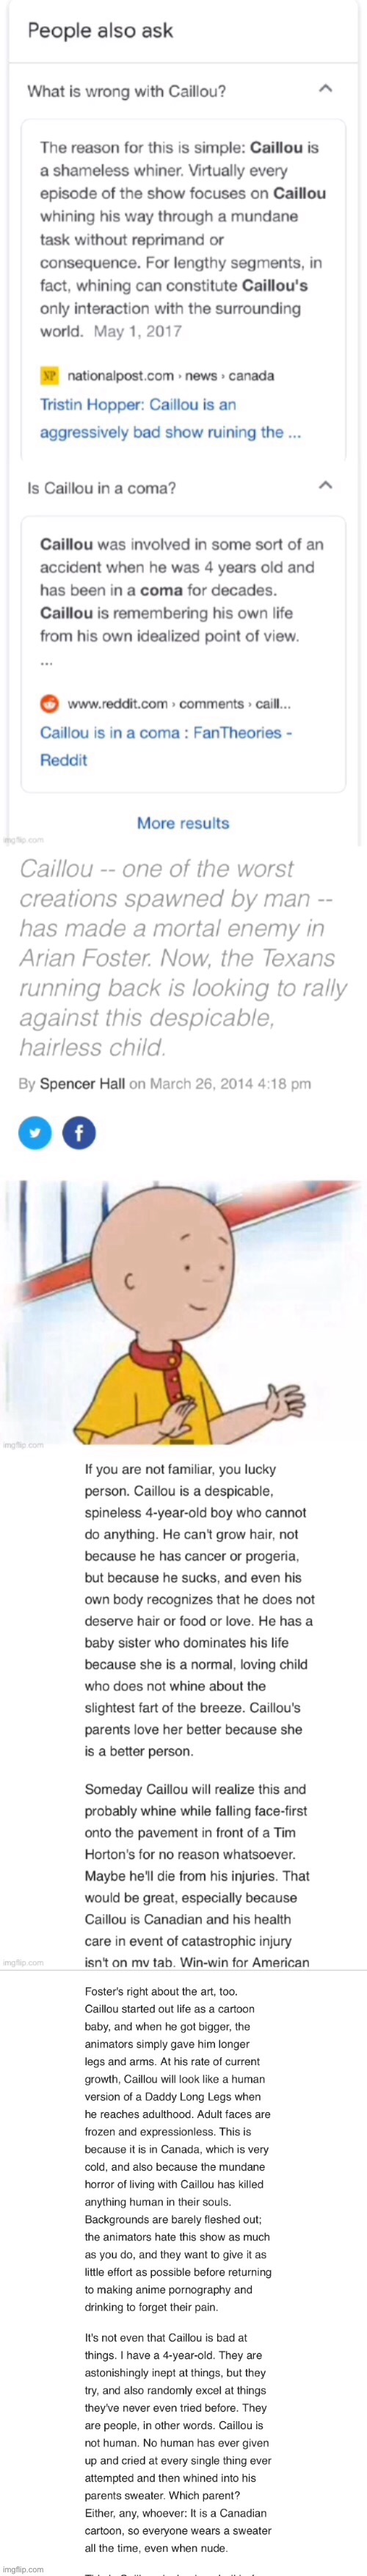 What happens when you search “why does Caillou have no hair” - Imgflip